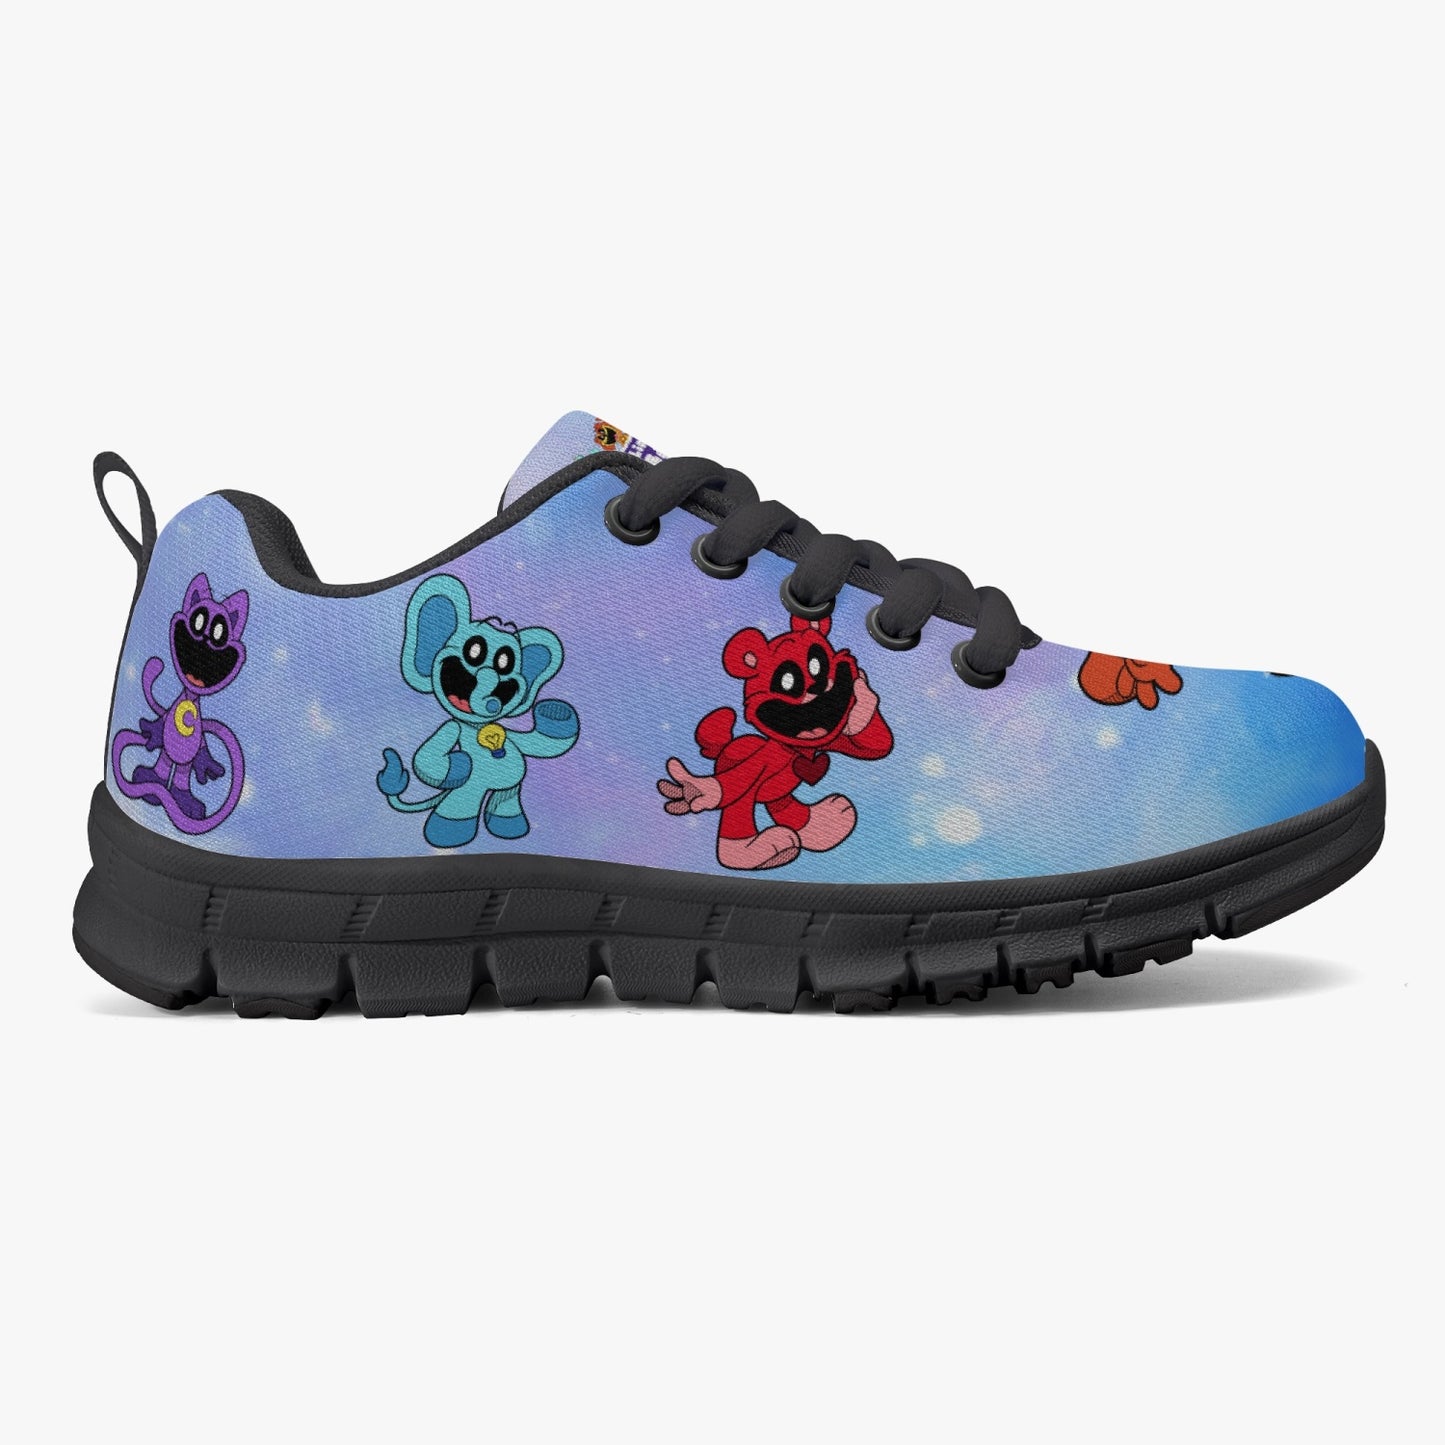 Kids' Smiling Critters Lightweight Mesh Sneakers